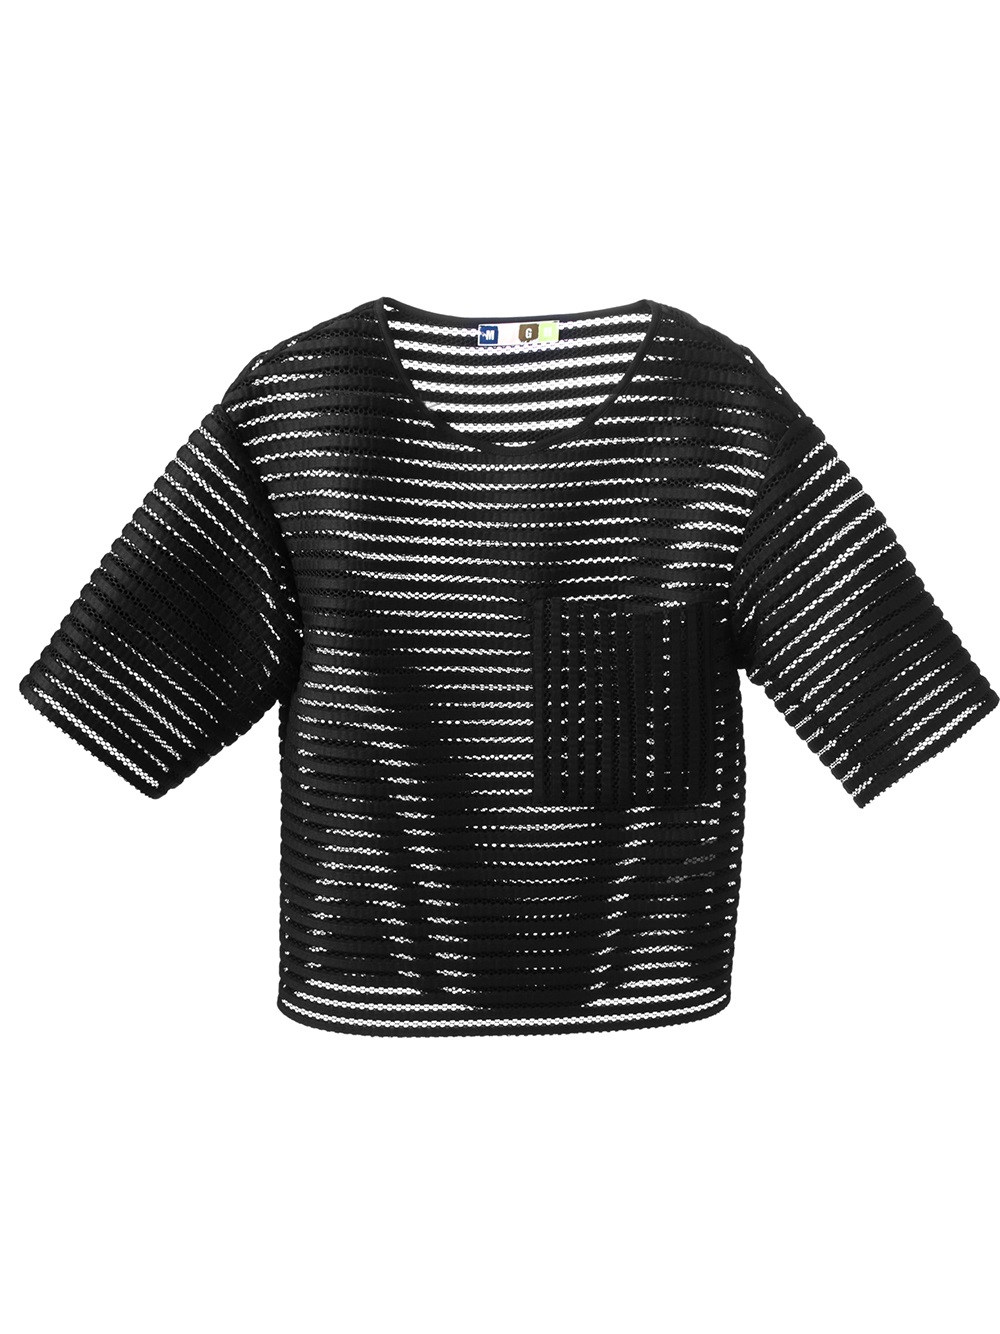 MSGM, netted panel top, 235 e